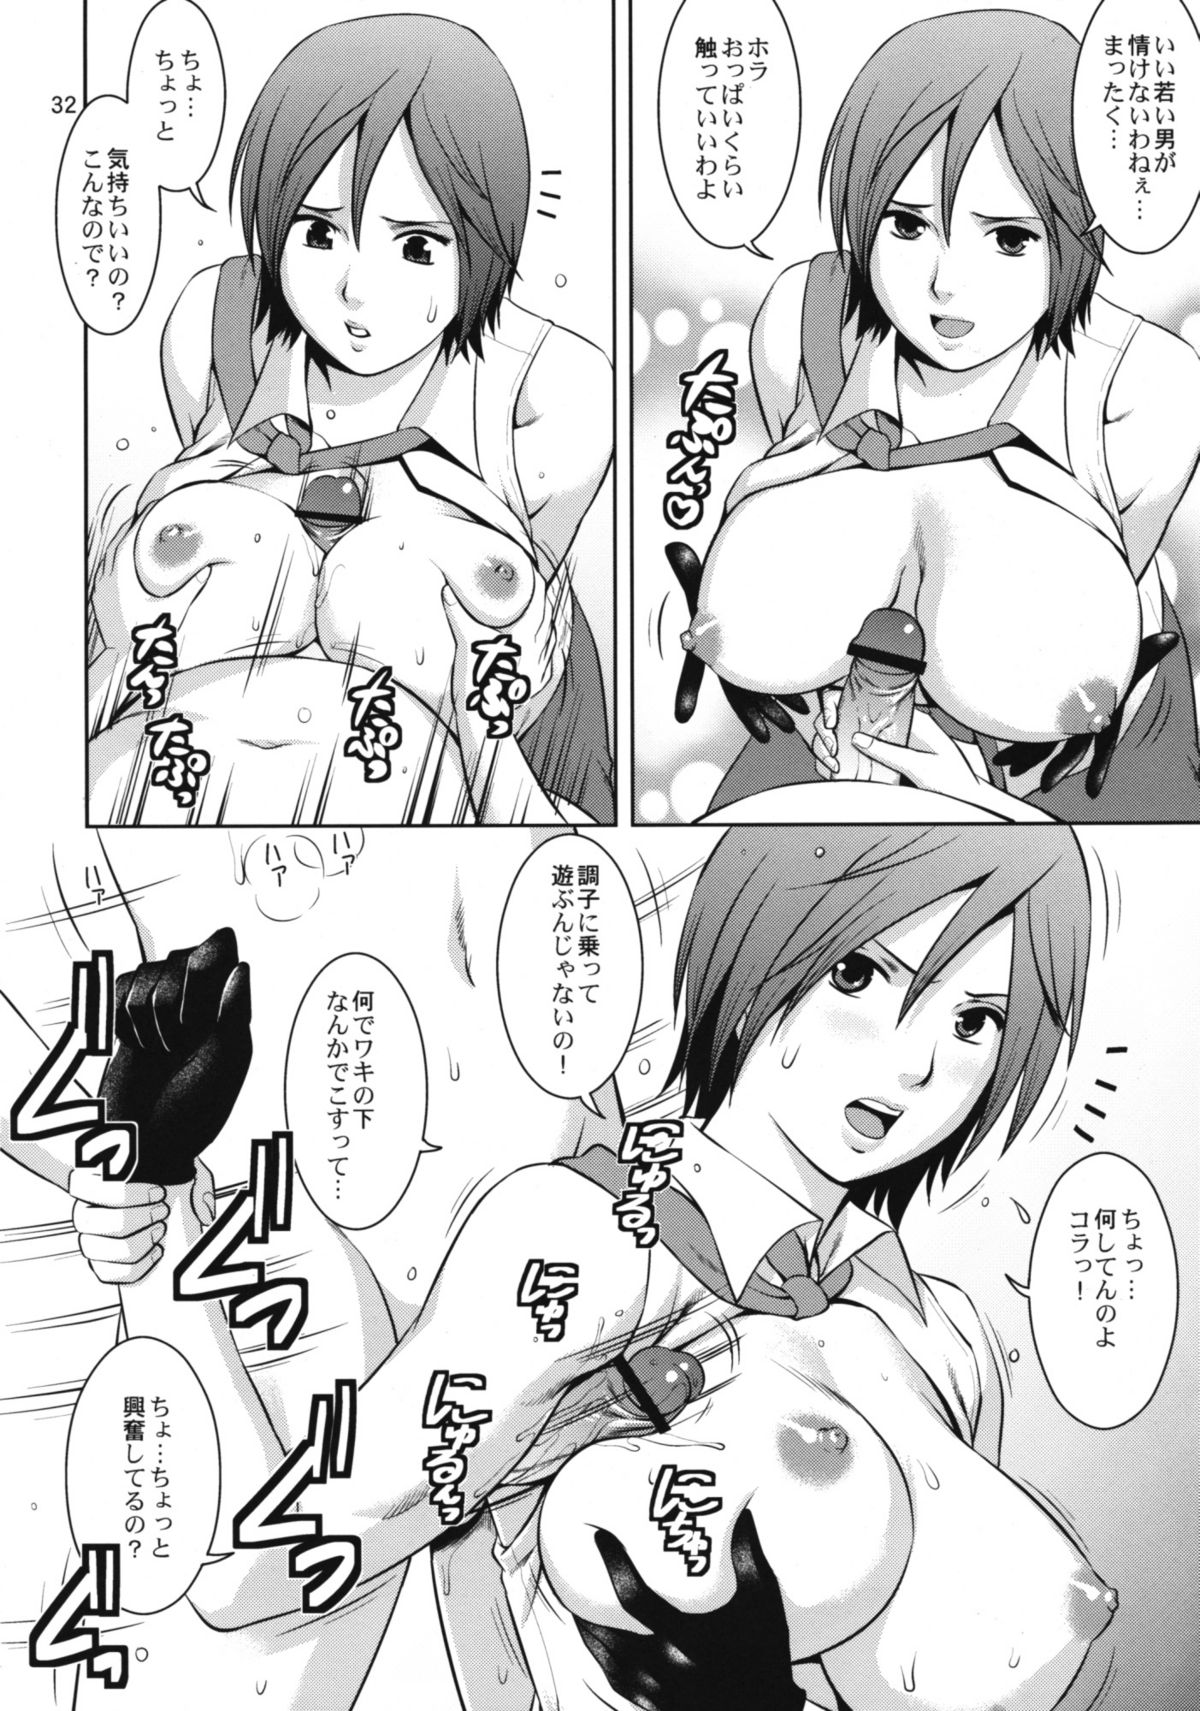 (C77) [Saigado] The Yuri & Friends 2009 UM - Unparticipation of Mai (King of Fighters) page 31 full